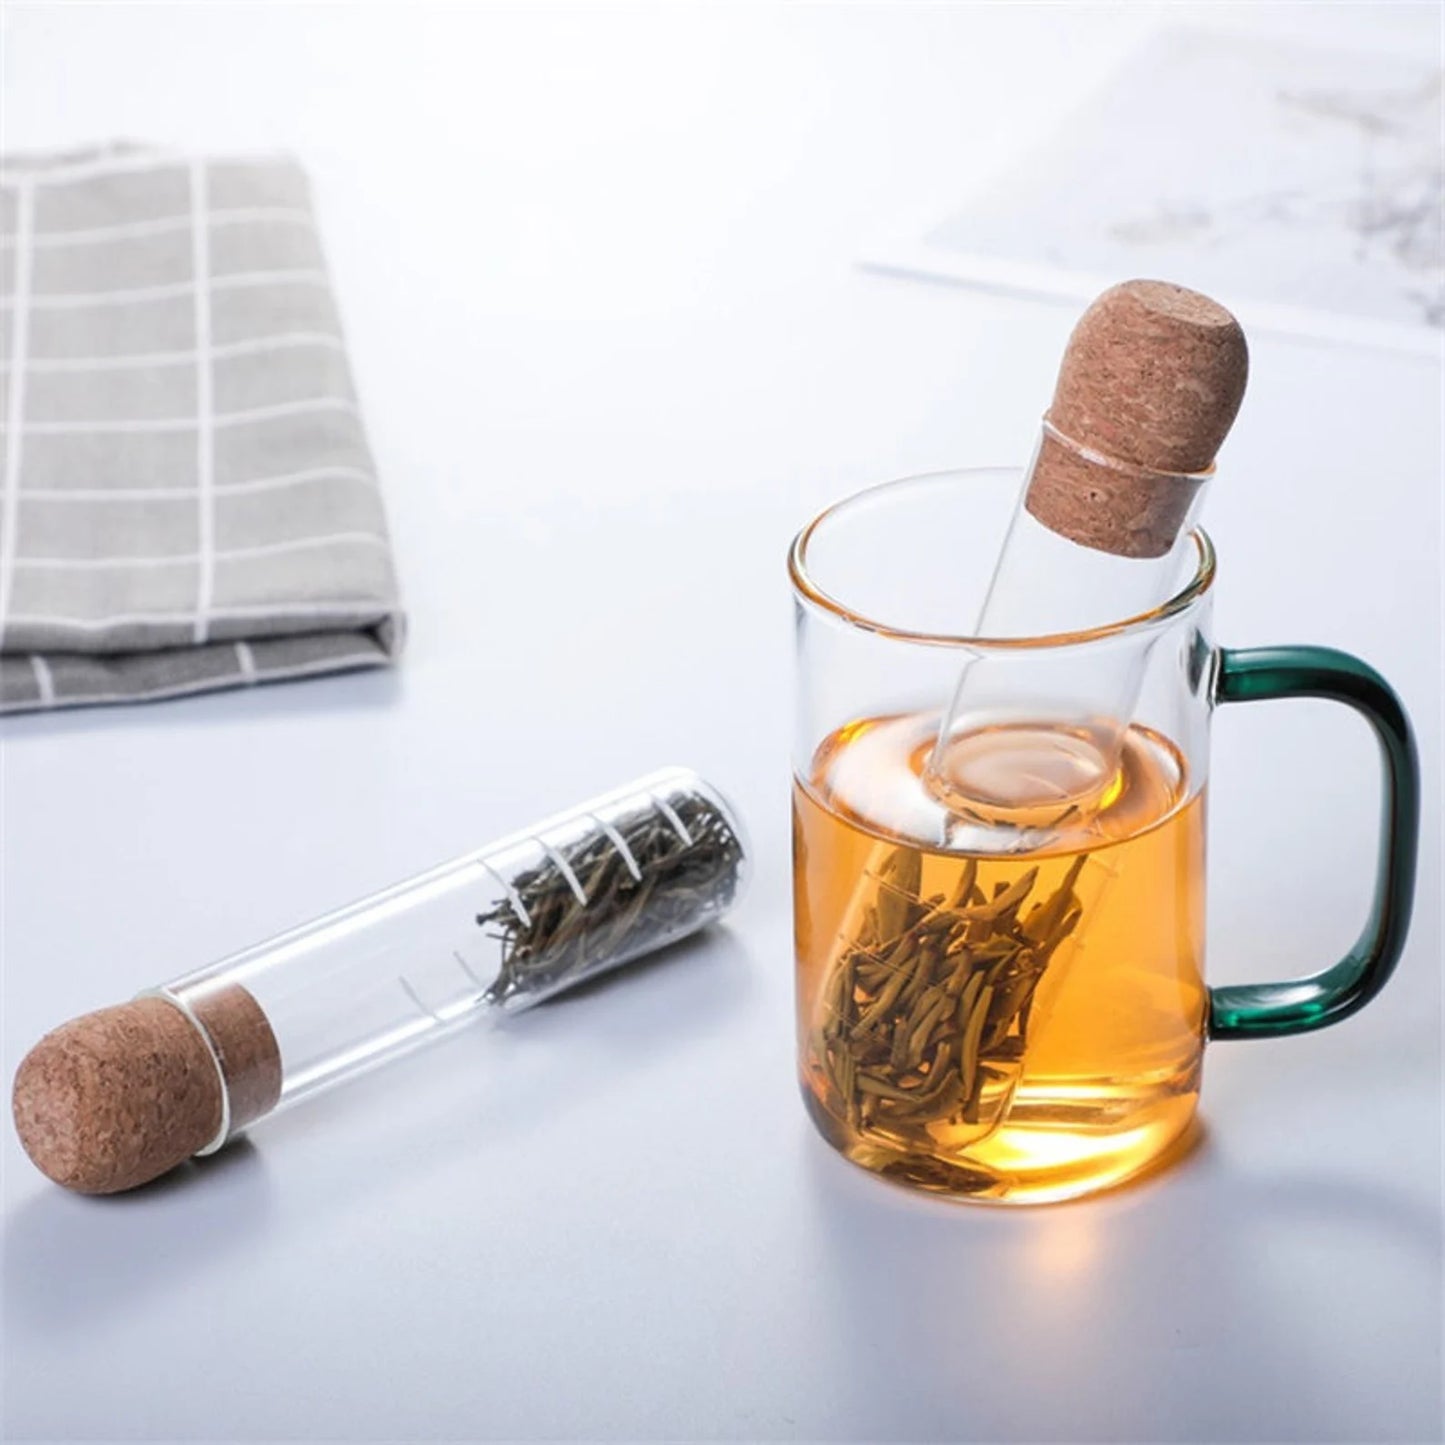 A tea infuser used for brewing loose leaf herbal tea sitting in a glass tea cup on a table next to another tea infuser with herbal tea inside next to a napkin.